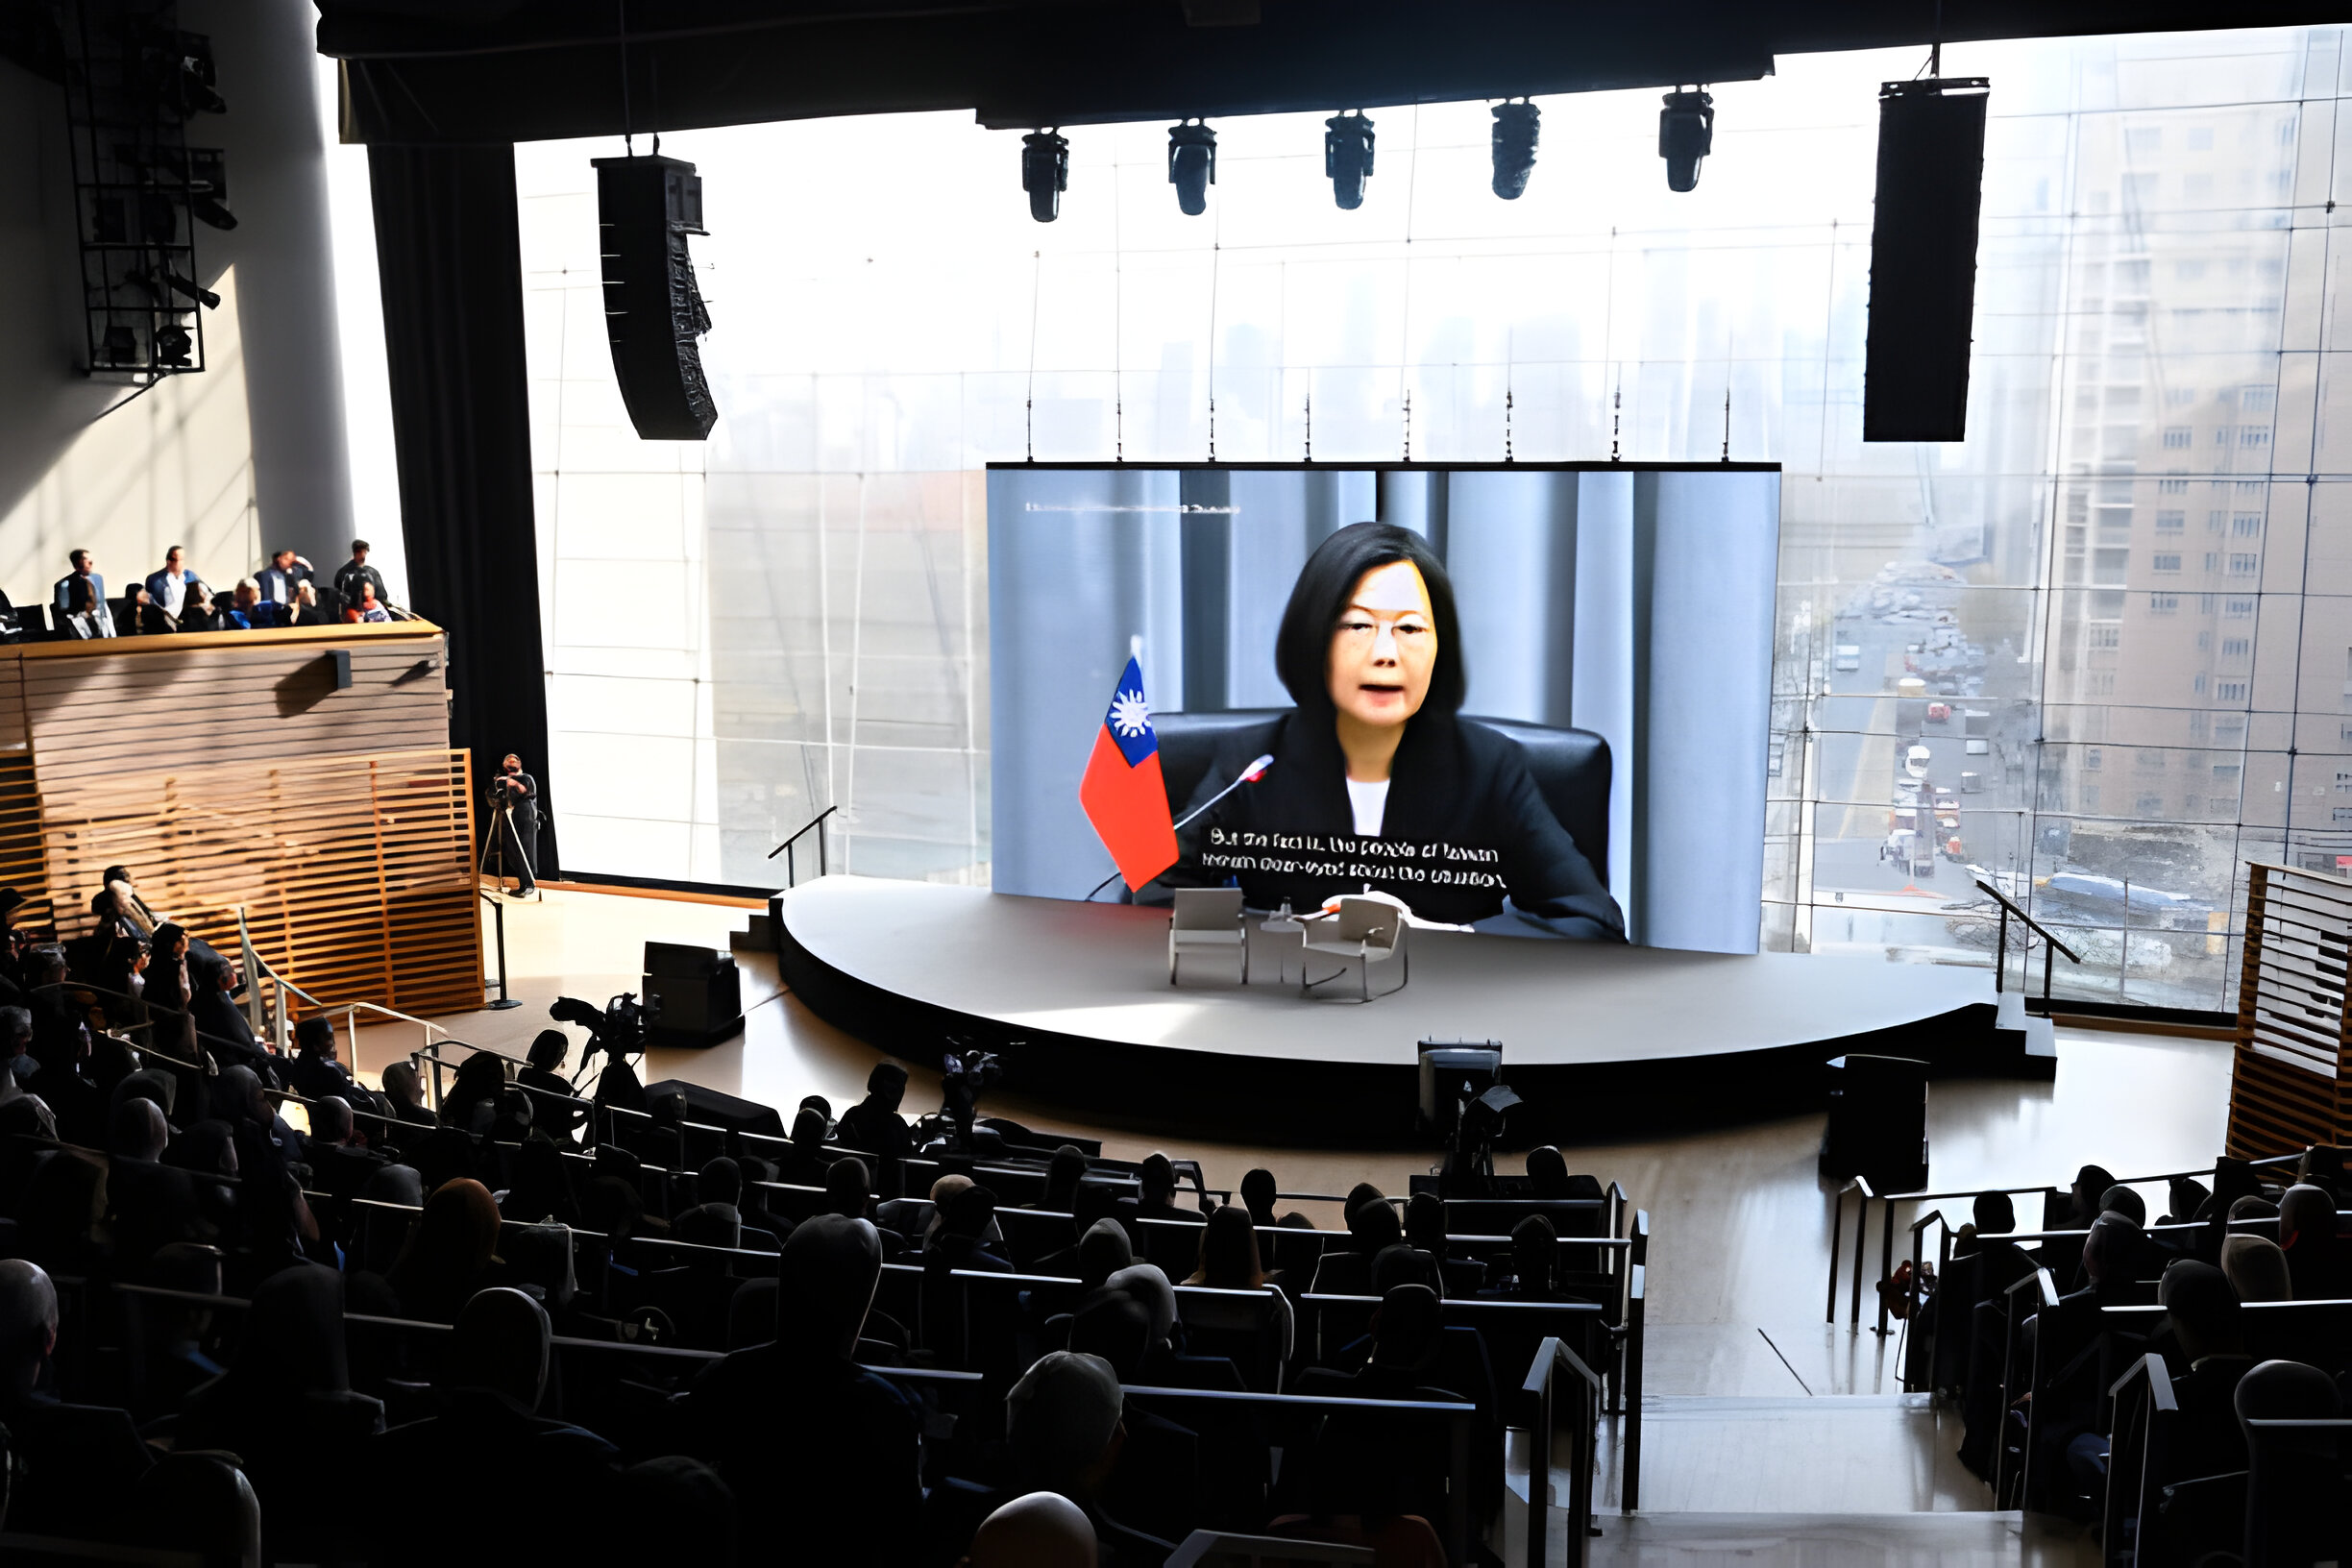 An interview between Andrew Ross Sorkin and President of Taiwan Tsai Ing-wen is displayed on a screen during The New York Times Dealbook Summit 2023 at Jazz at Lincoln Center on November 29, 2023 in New York City. (Photo by Slaven Vlasic/Getty Images for The New York Times)